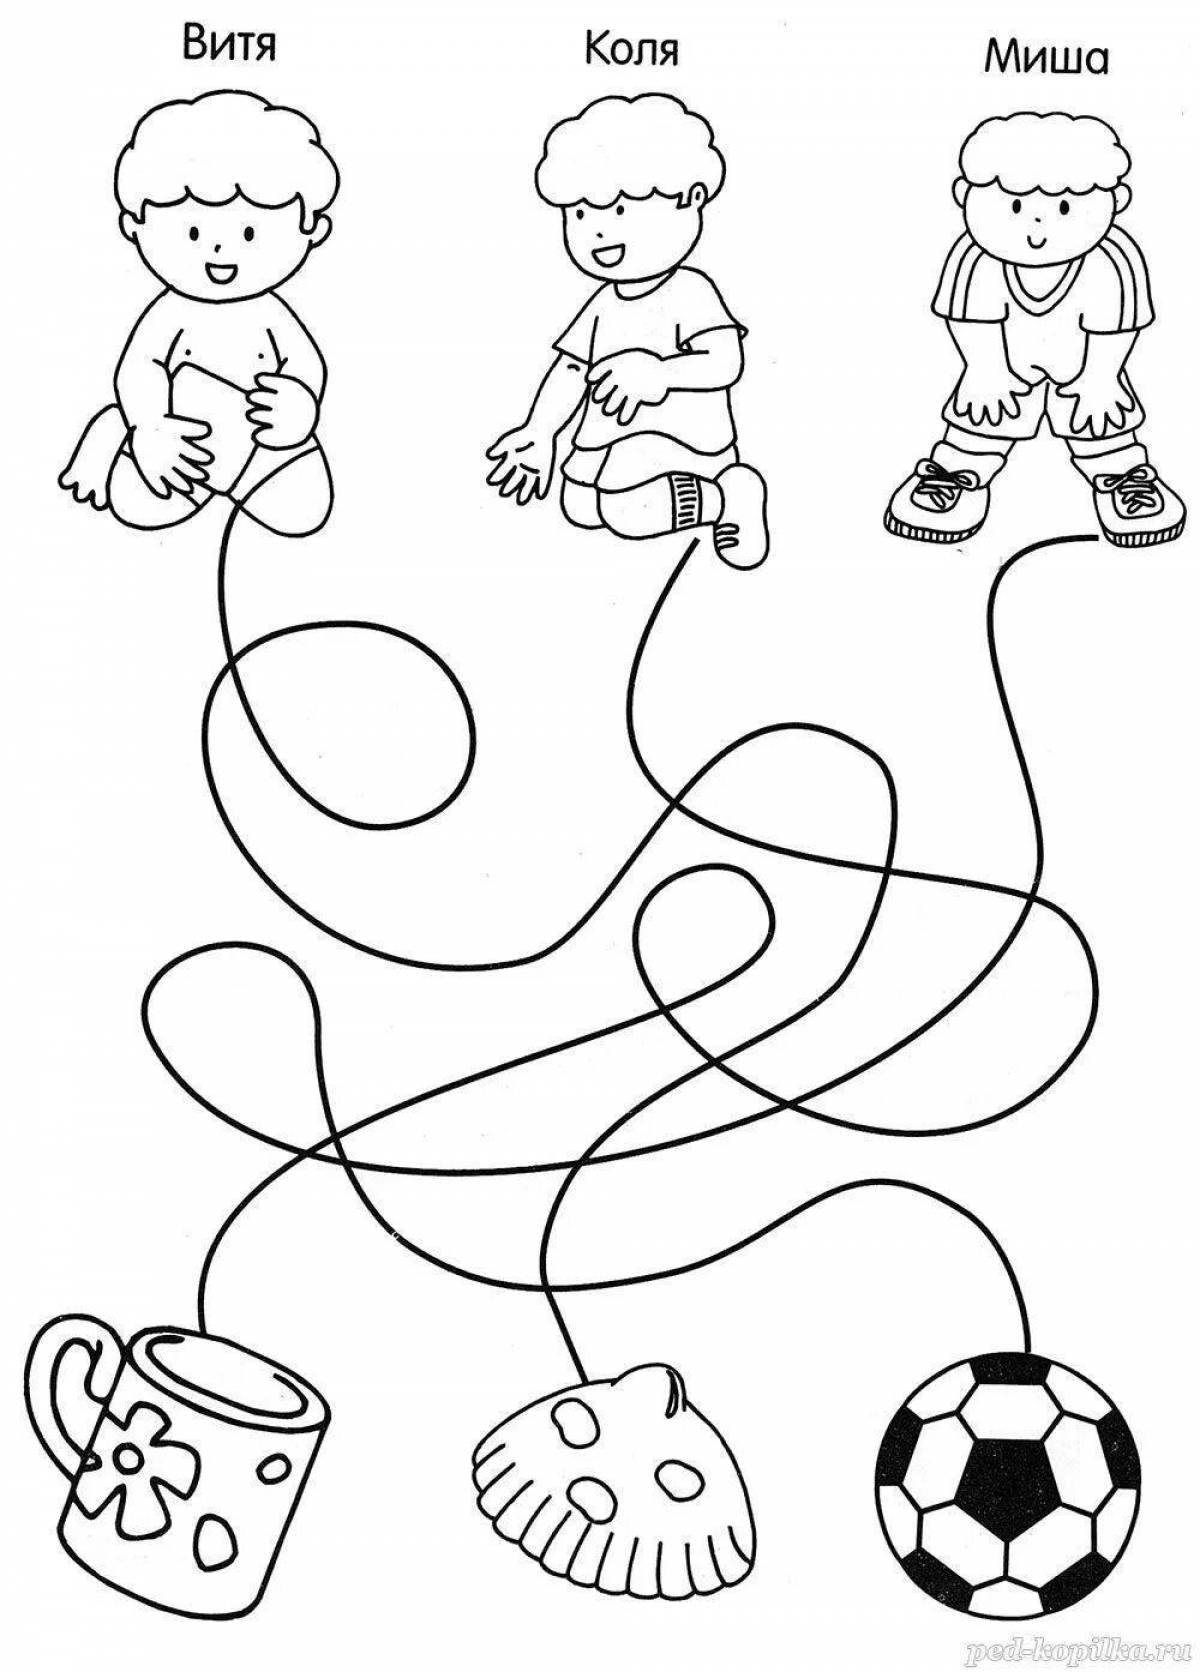 Fun coloring games for kids aged 3+